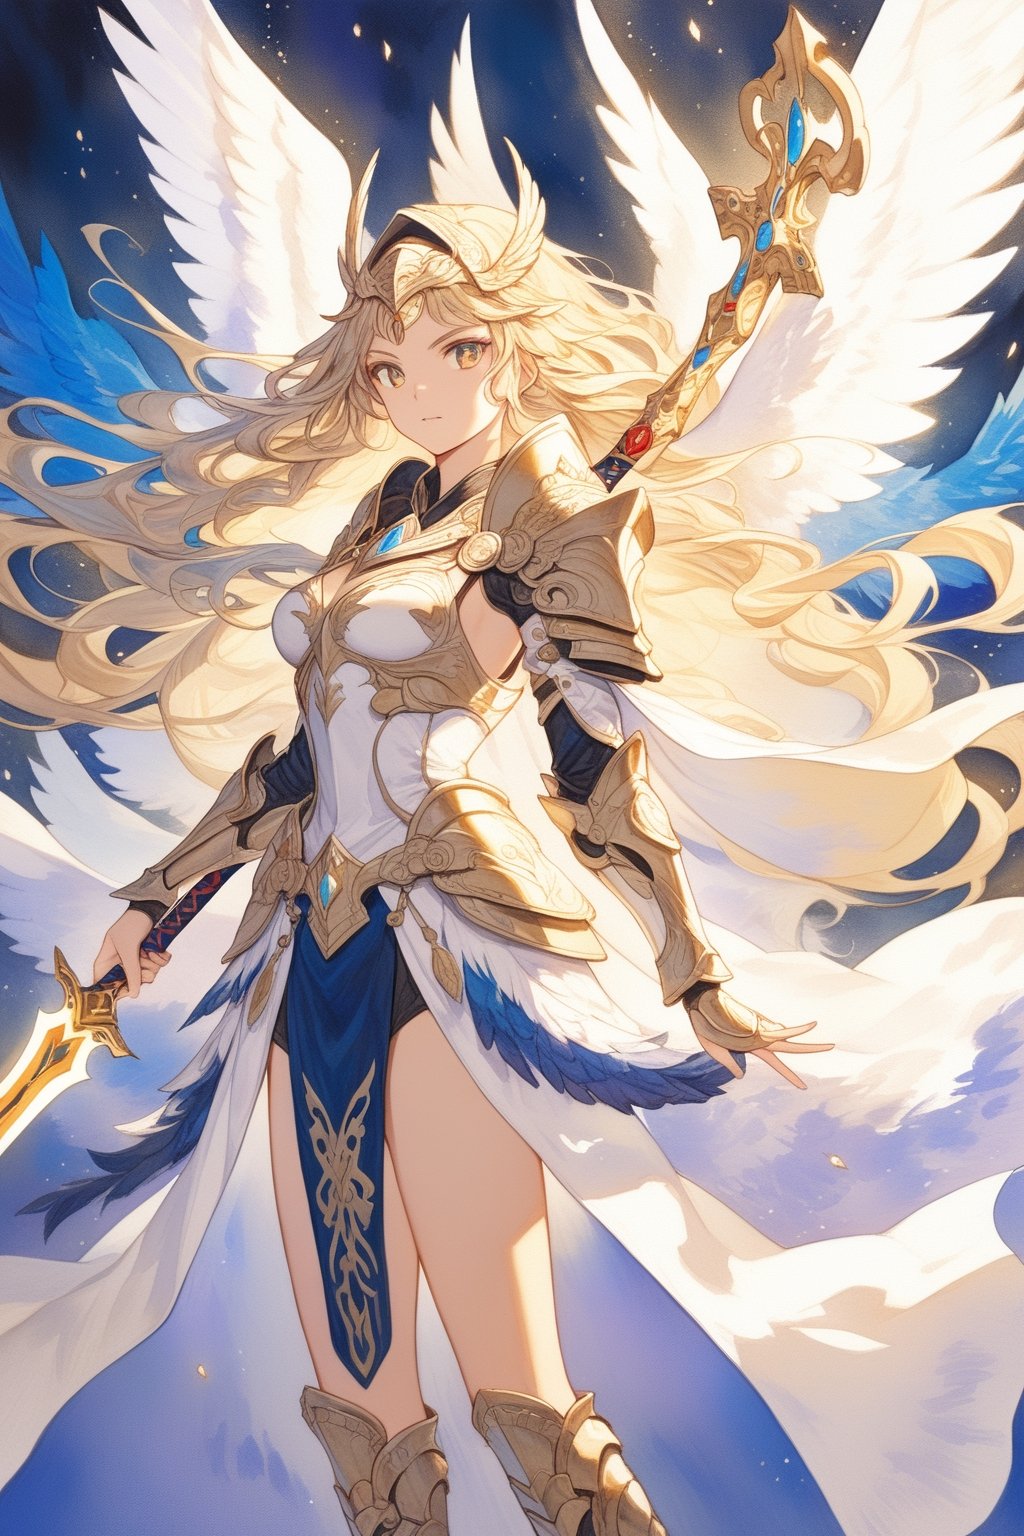 a captivating valkyrie, gleaming armor, fierce expression, holding a glowing sword. expertly craft acrylic painting with vibrant colors, intricate details. flowing golden hair, contrasting with deep background, adding depth. every brushstroke shocases the artists skill, conveying power and grace.
